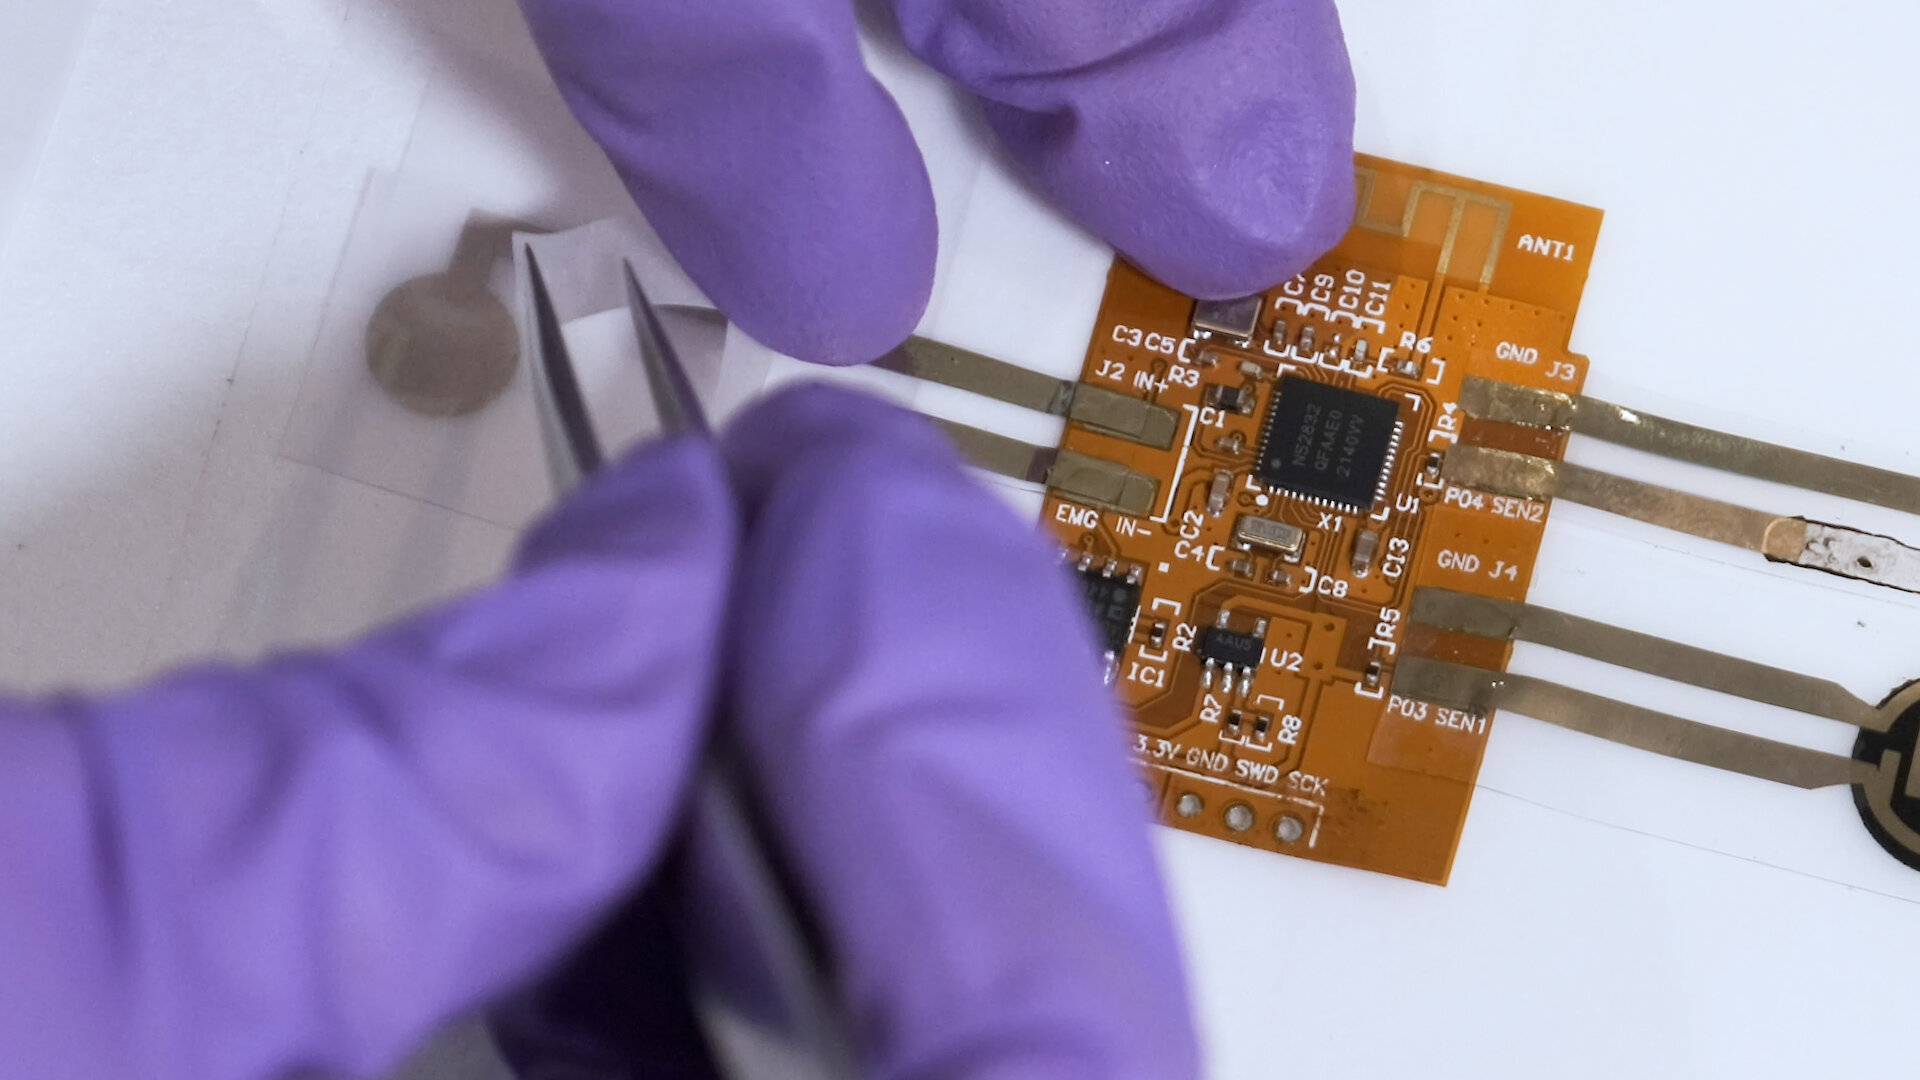 ‘Lego-like’ universal connector makes assembling stretchable devices a snap